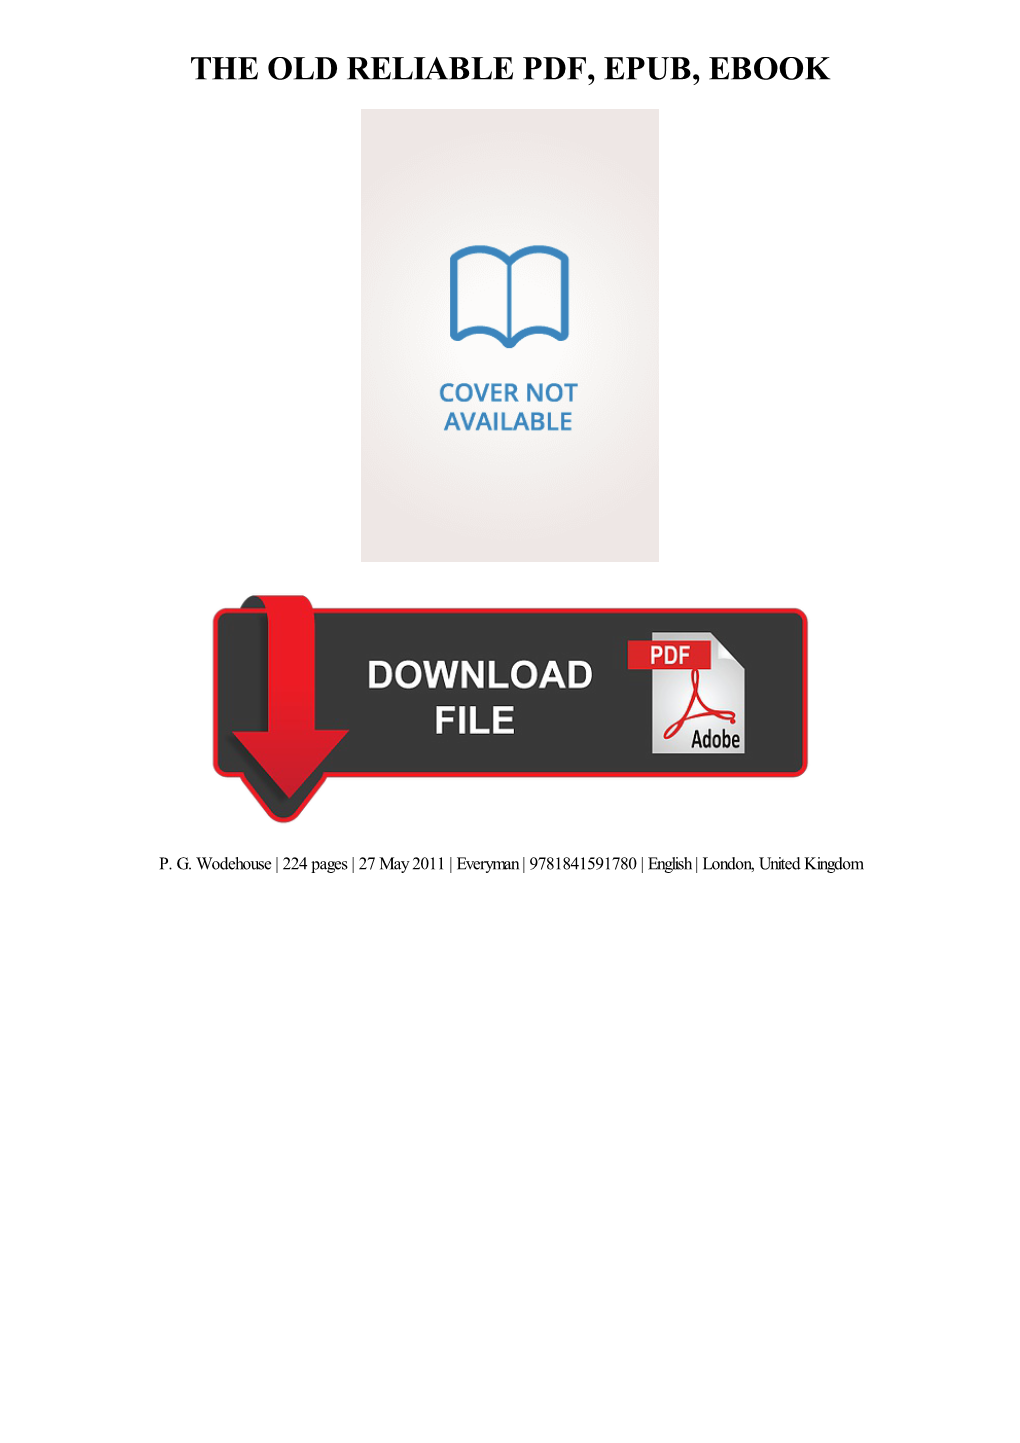 {Download PDF} the Old Reliable Ebook, Epub